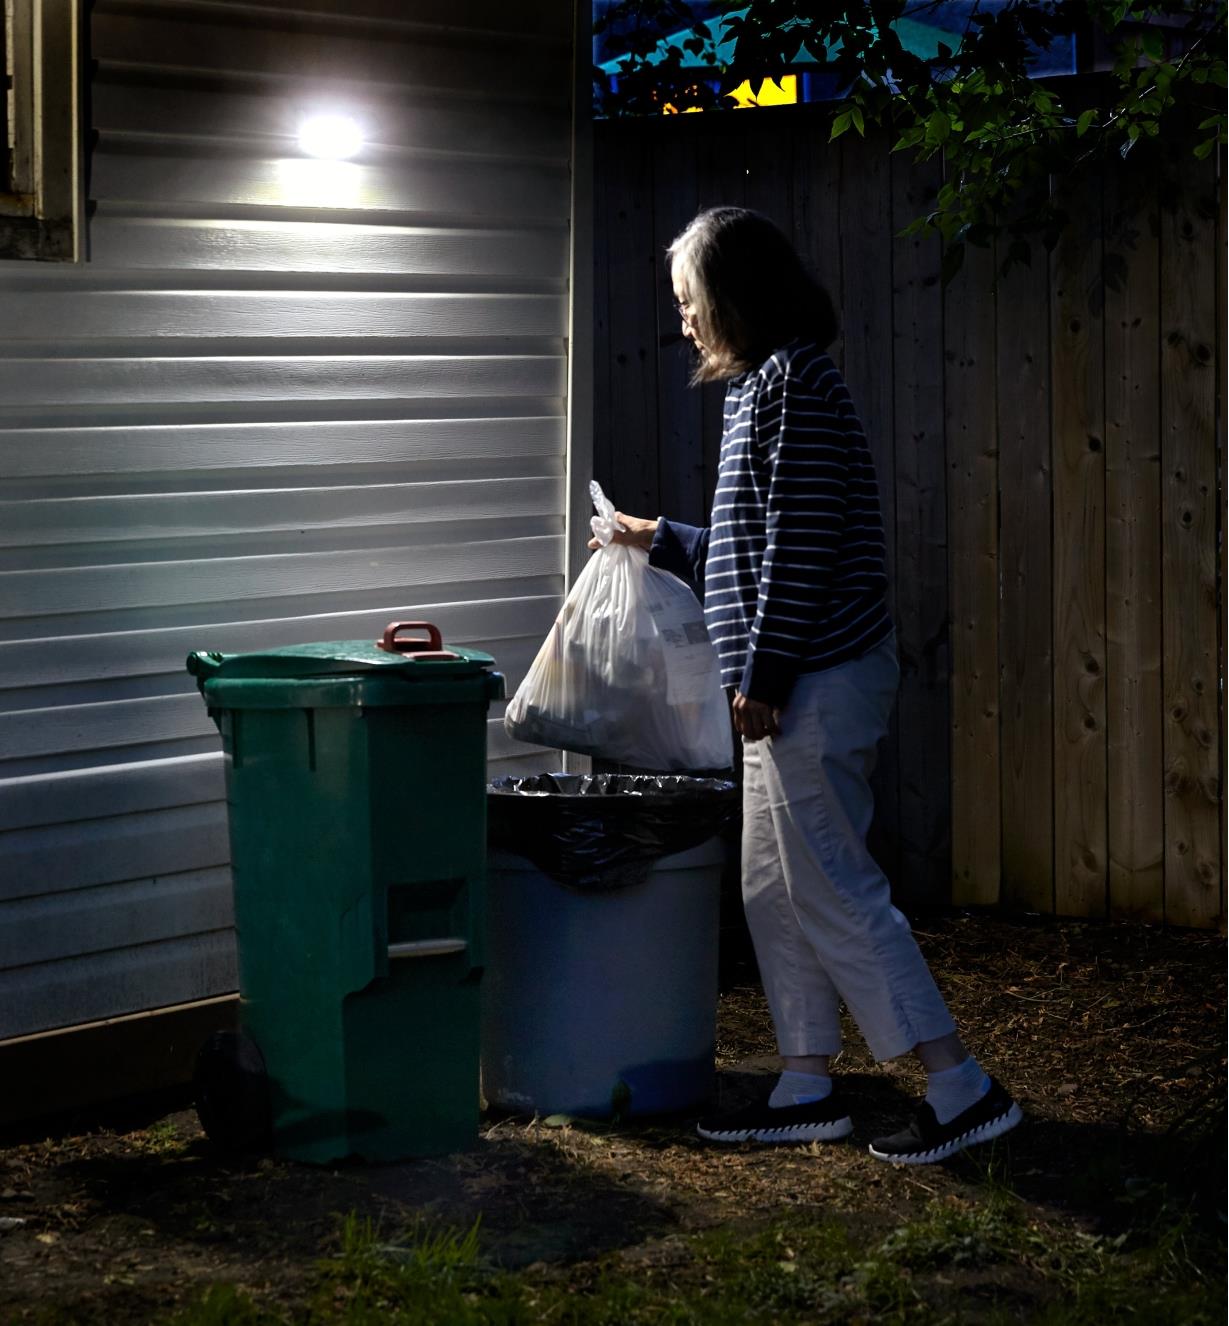 A woman discards a bag of garbage, triggering a motion-activated light mounted above the garbage can